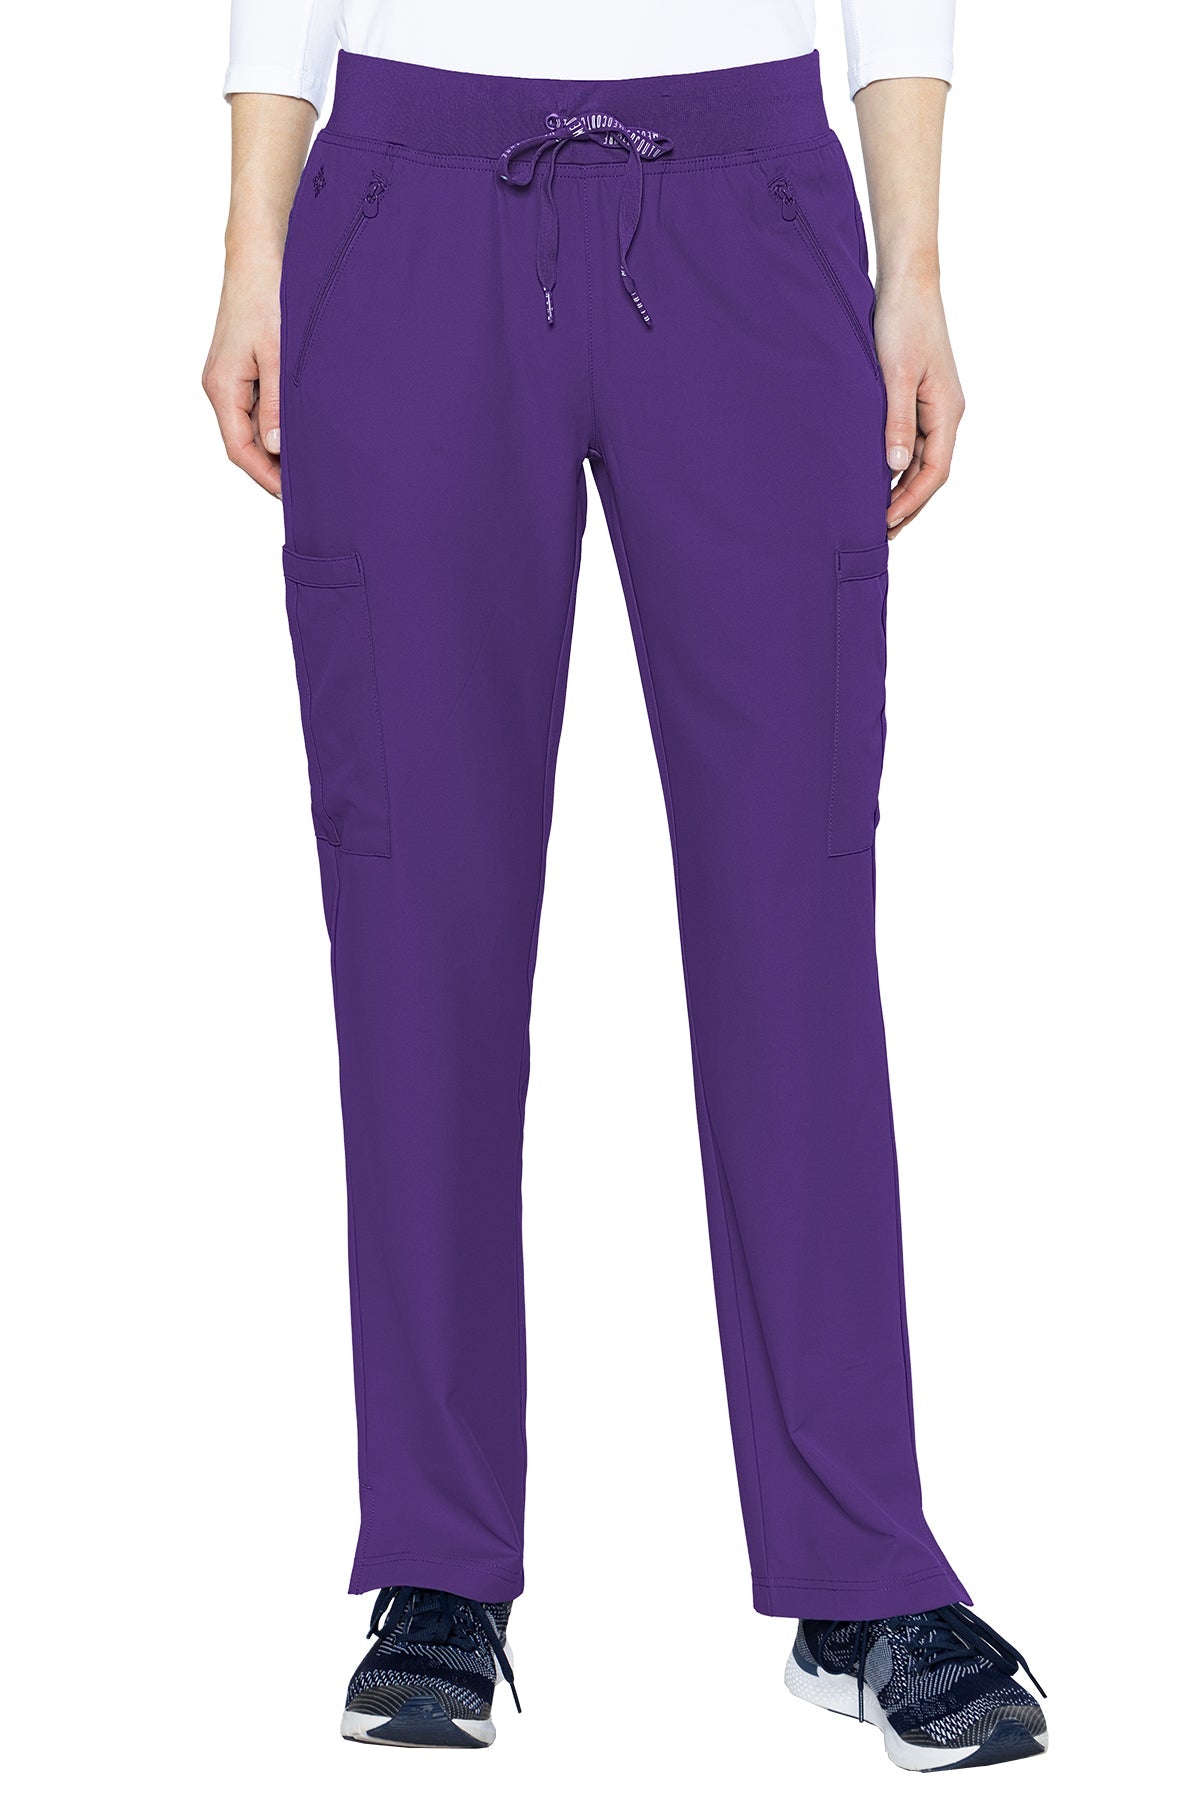 Med Couture Zipper Pant